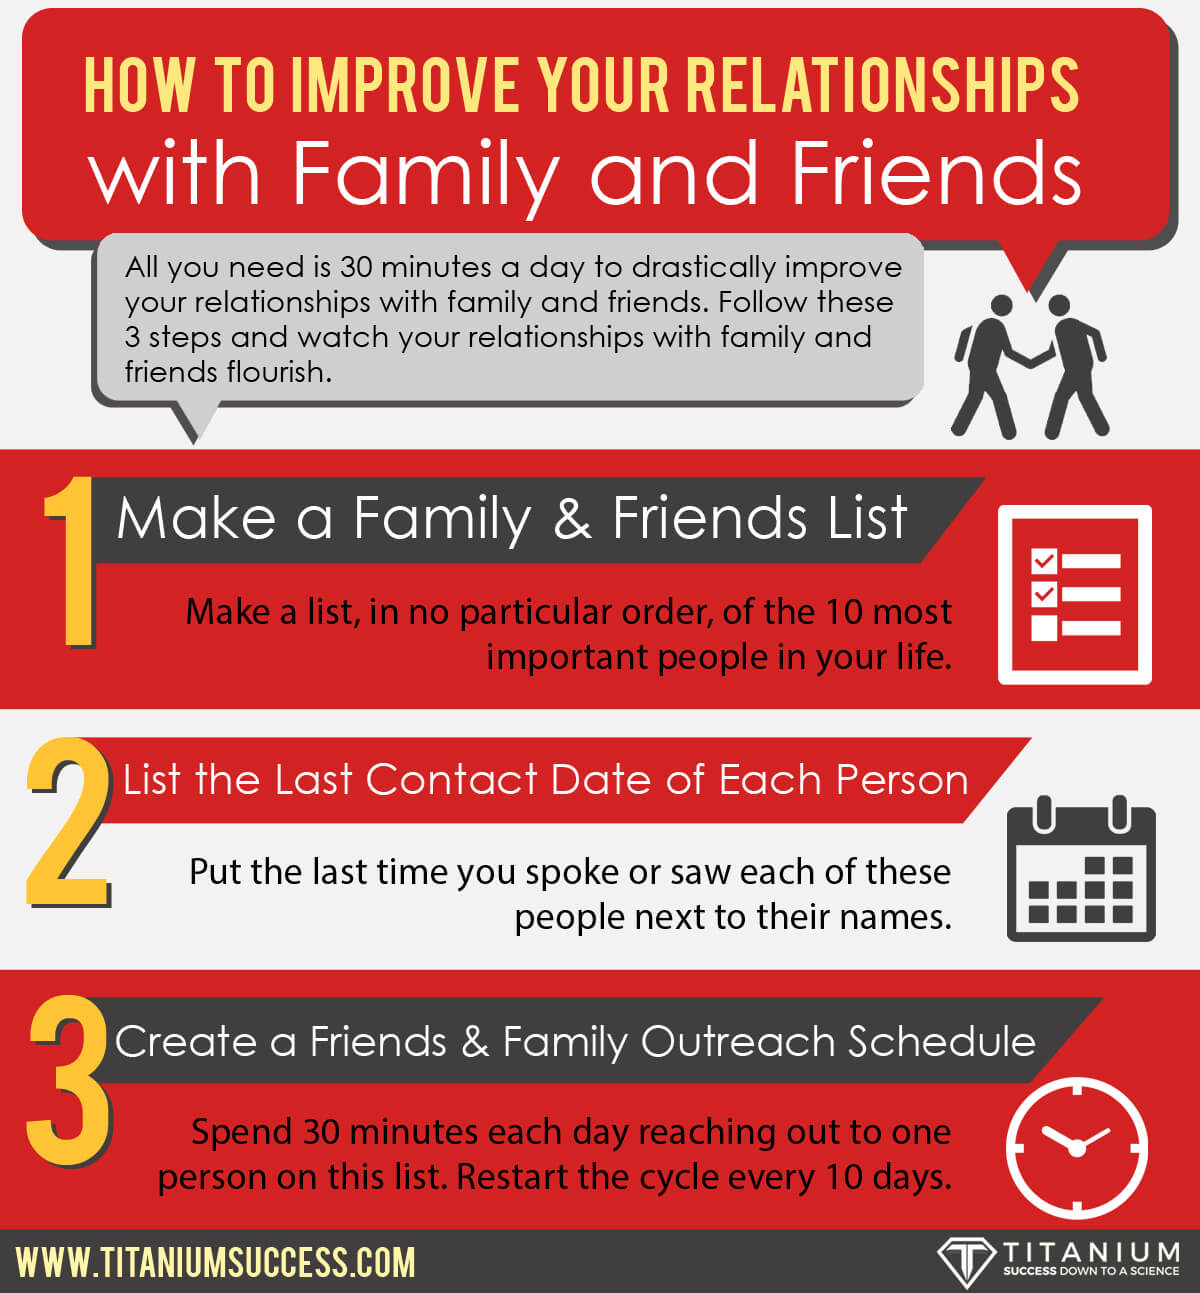 How to Improve Your Relationships with Family and Friends Infographic - TS